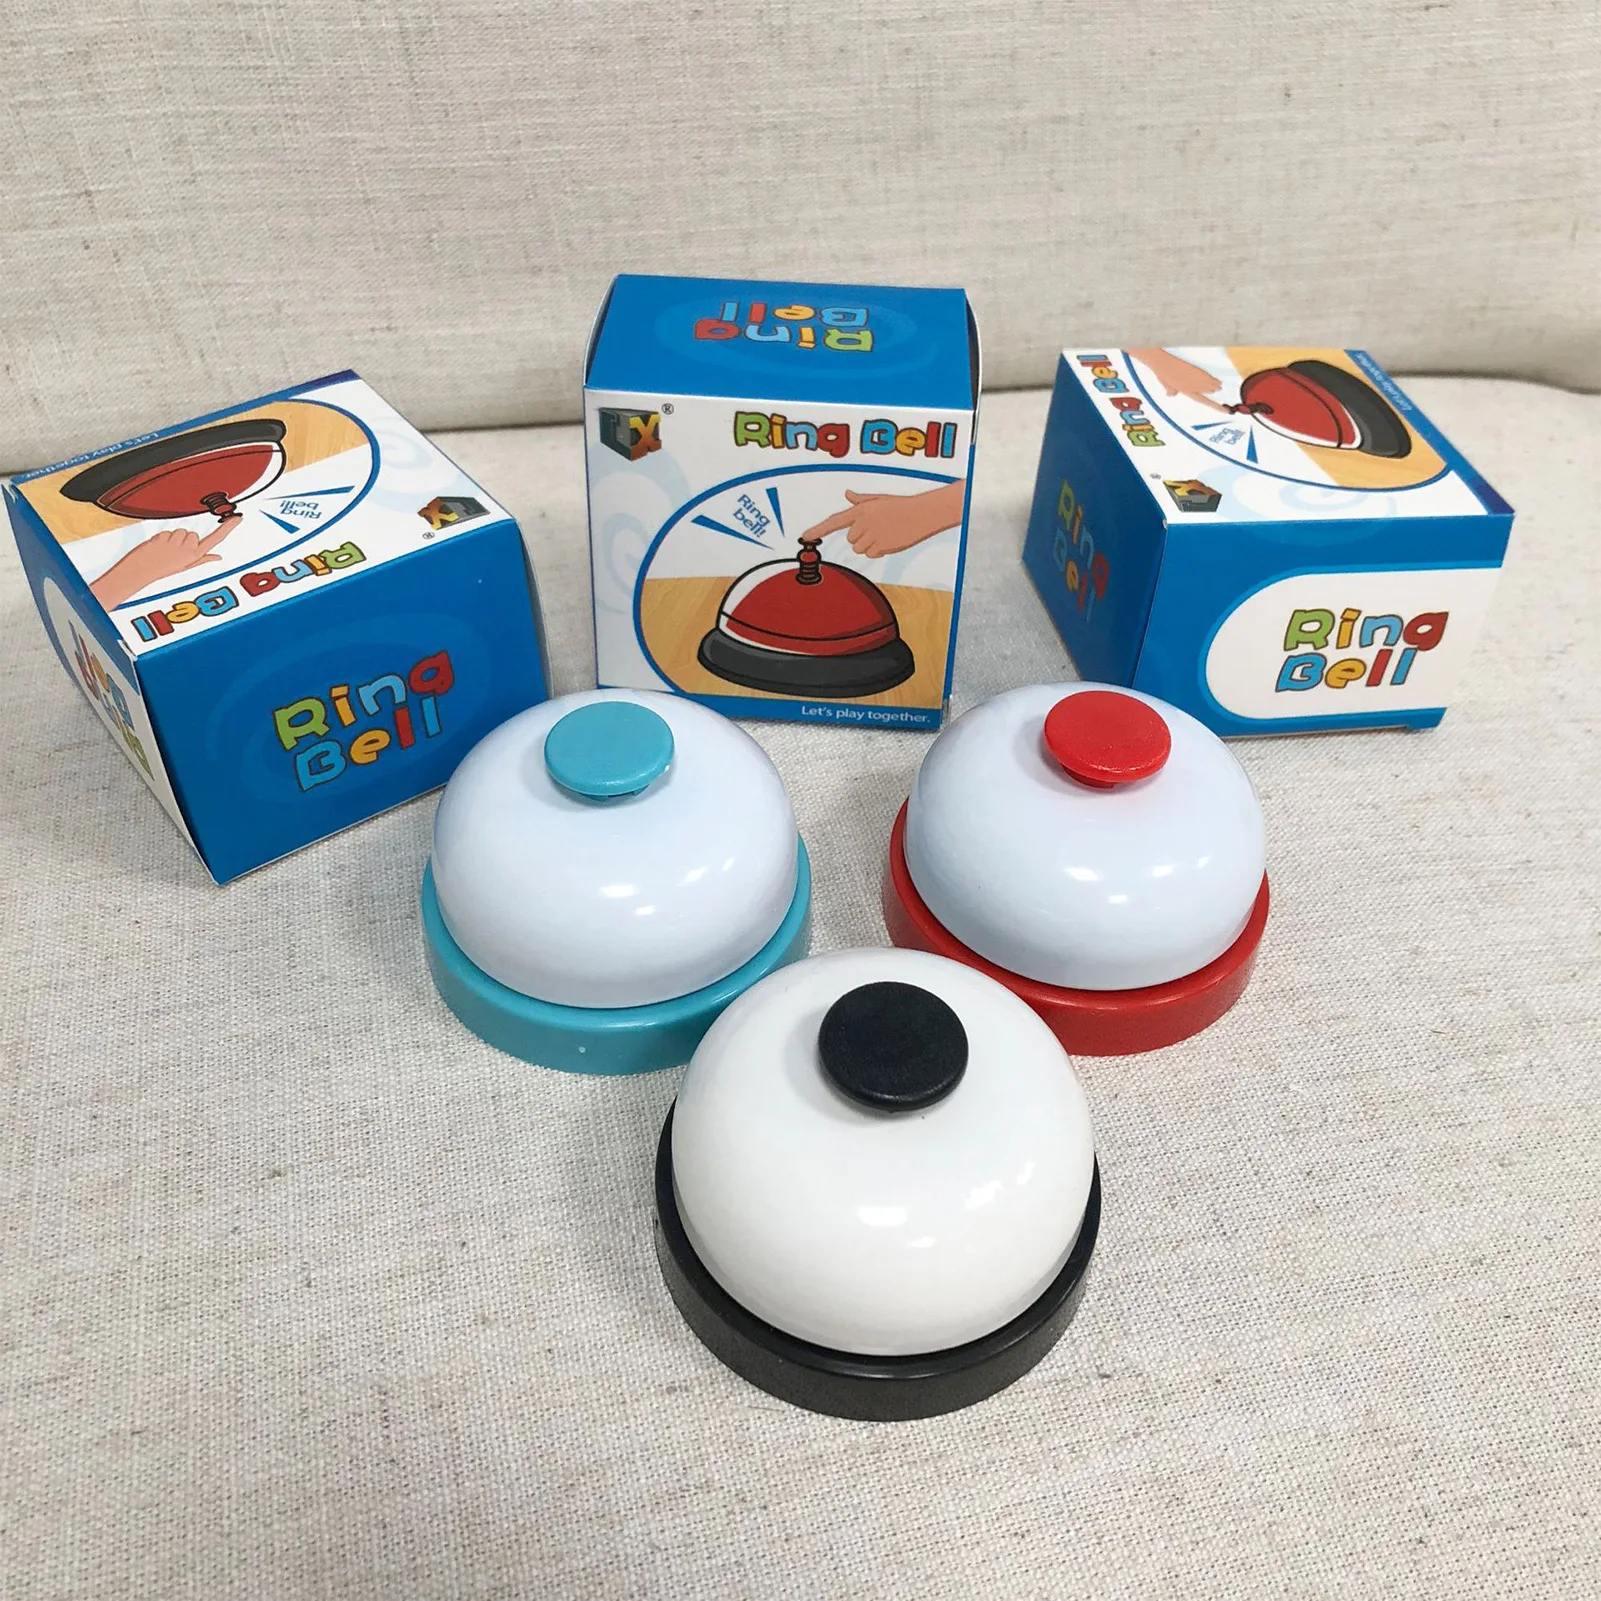 

Customer Service Call Bells With Big Button Crisp Sound Attract Attention For Offices Hotels Schools Restaurants Ding Ding Ding